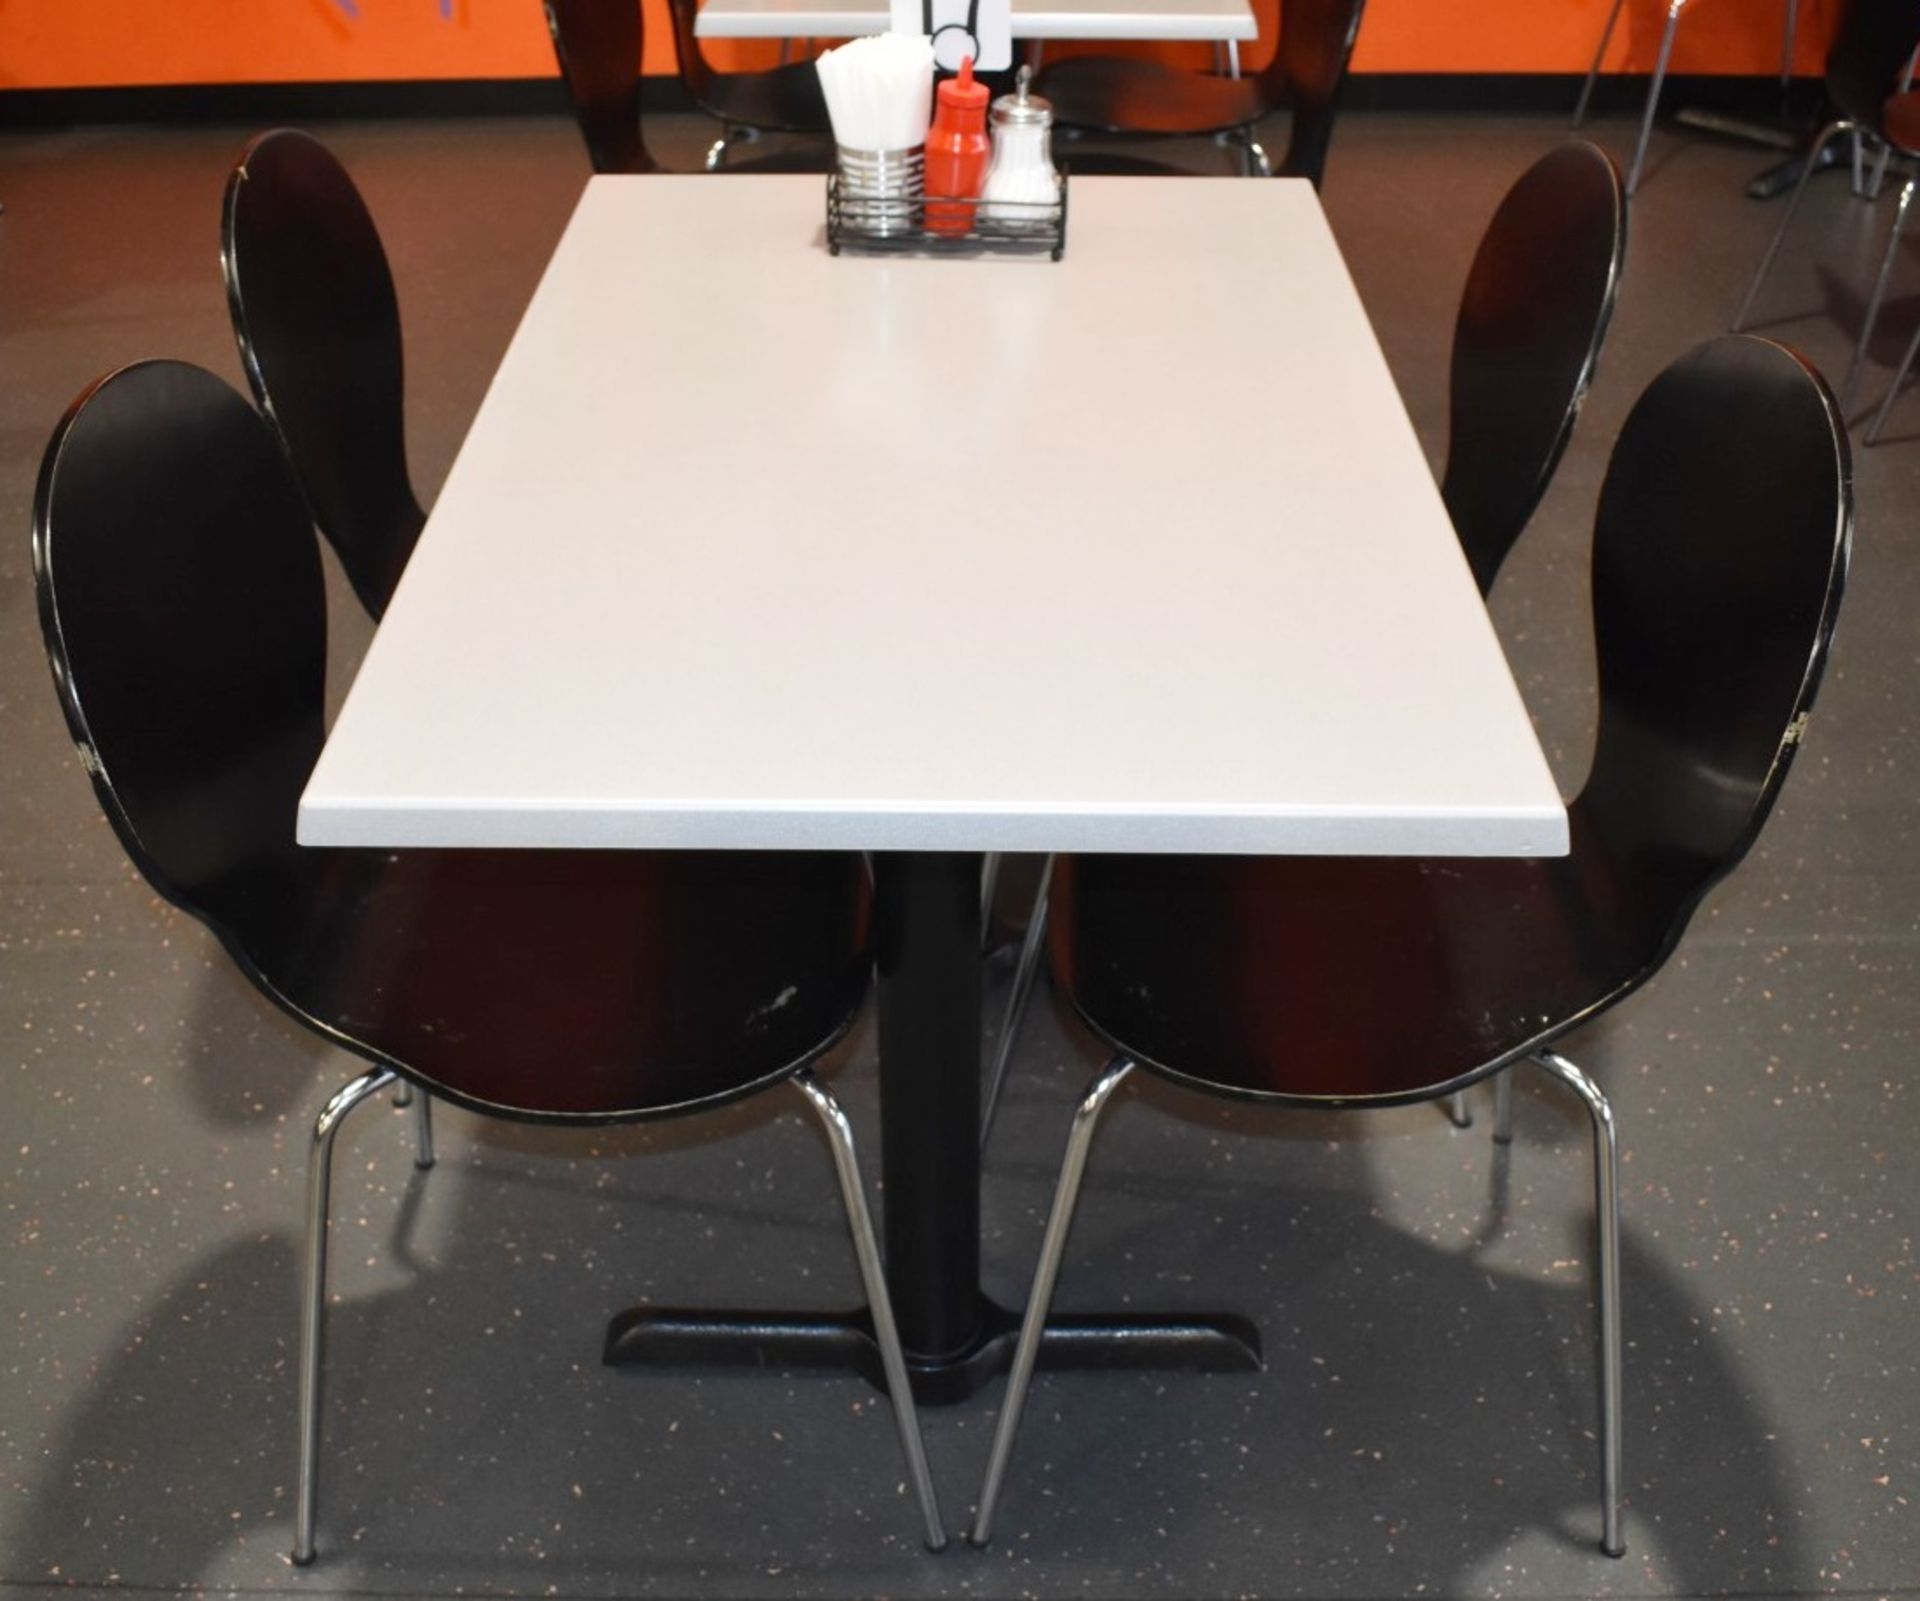 8 x Table and Chair Sets Suitable For Canteens, Cafes or Bistros - Includes 8 Tables and 24 Chairs - Image 6 of 15